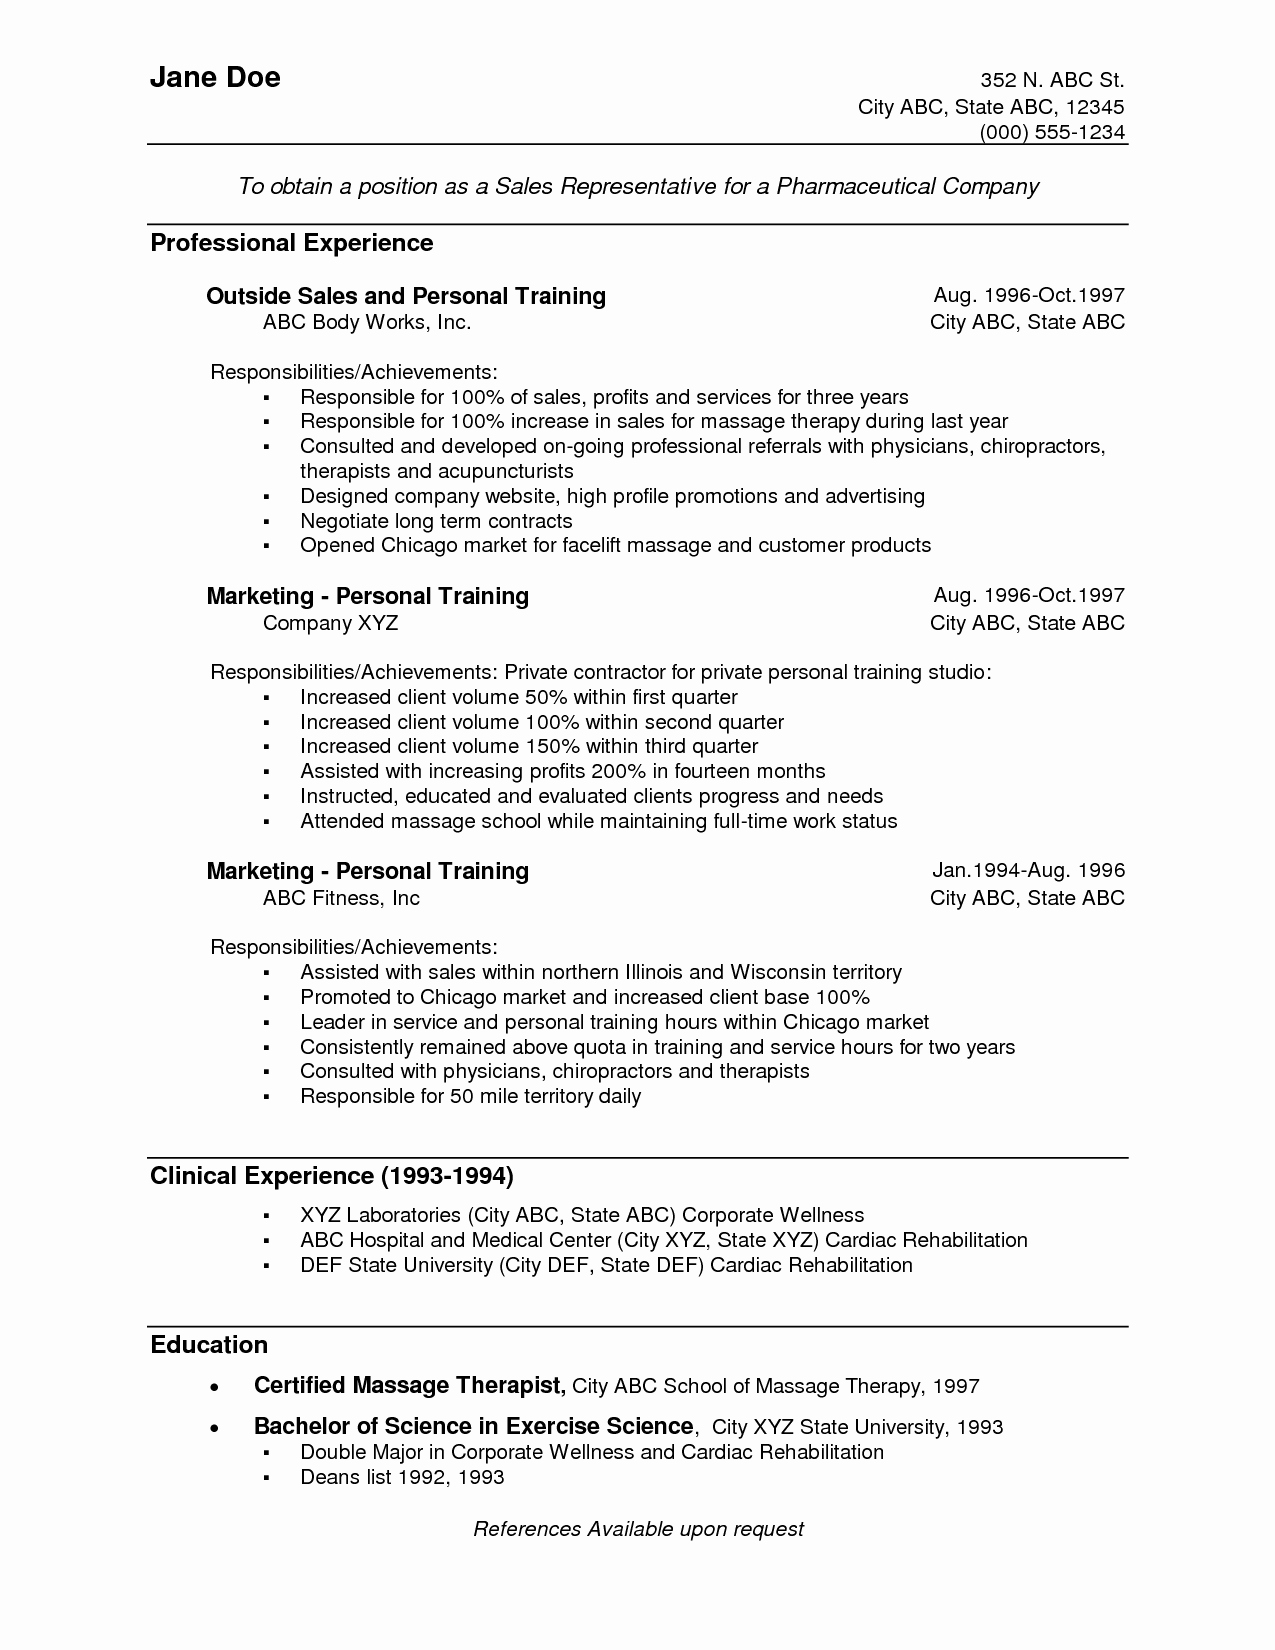 Medical Device Sales Resume Objective Examples